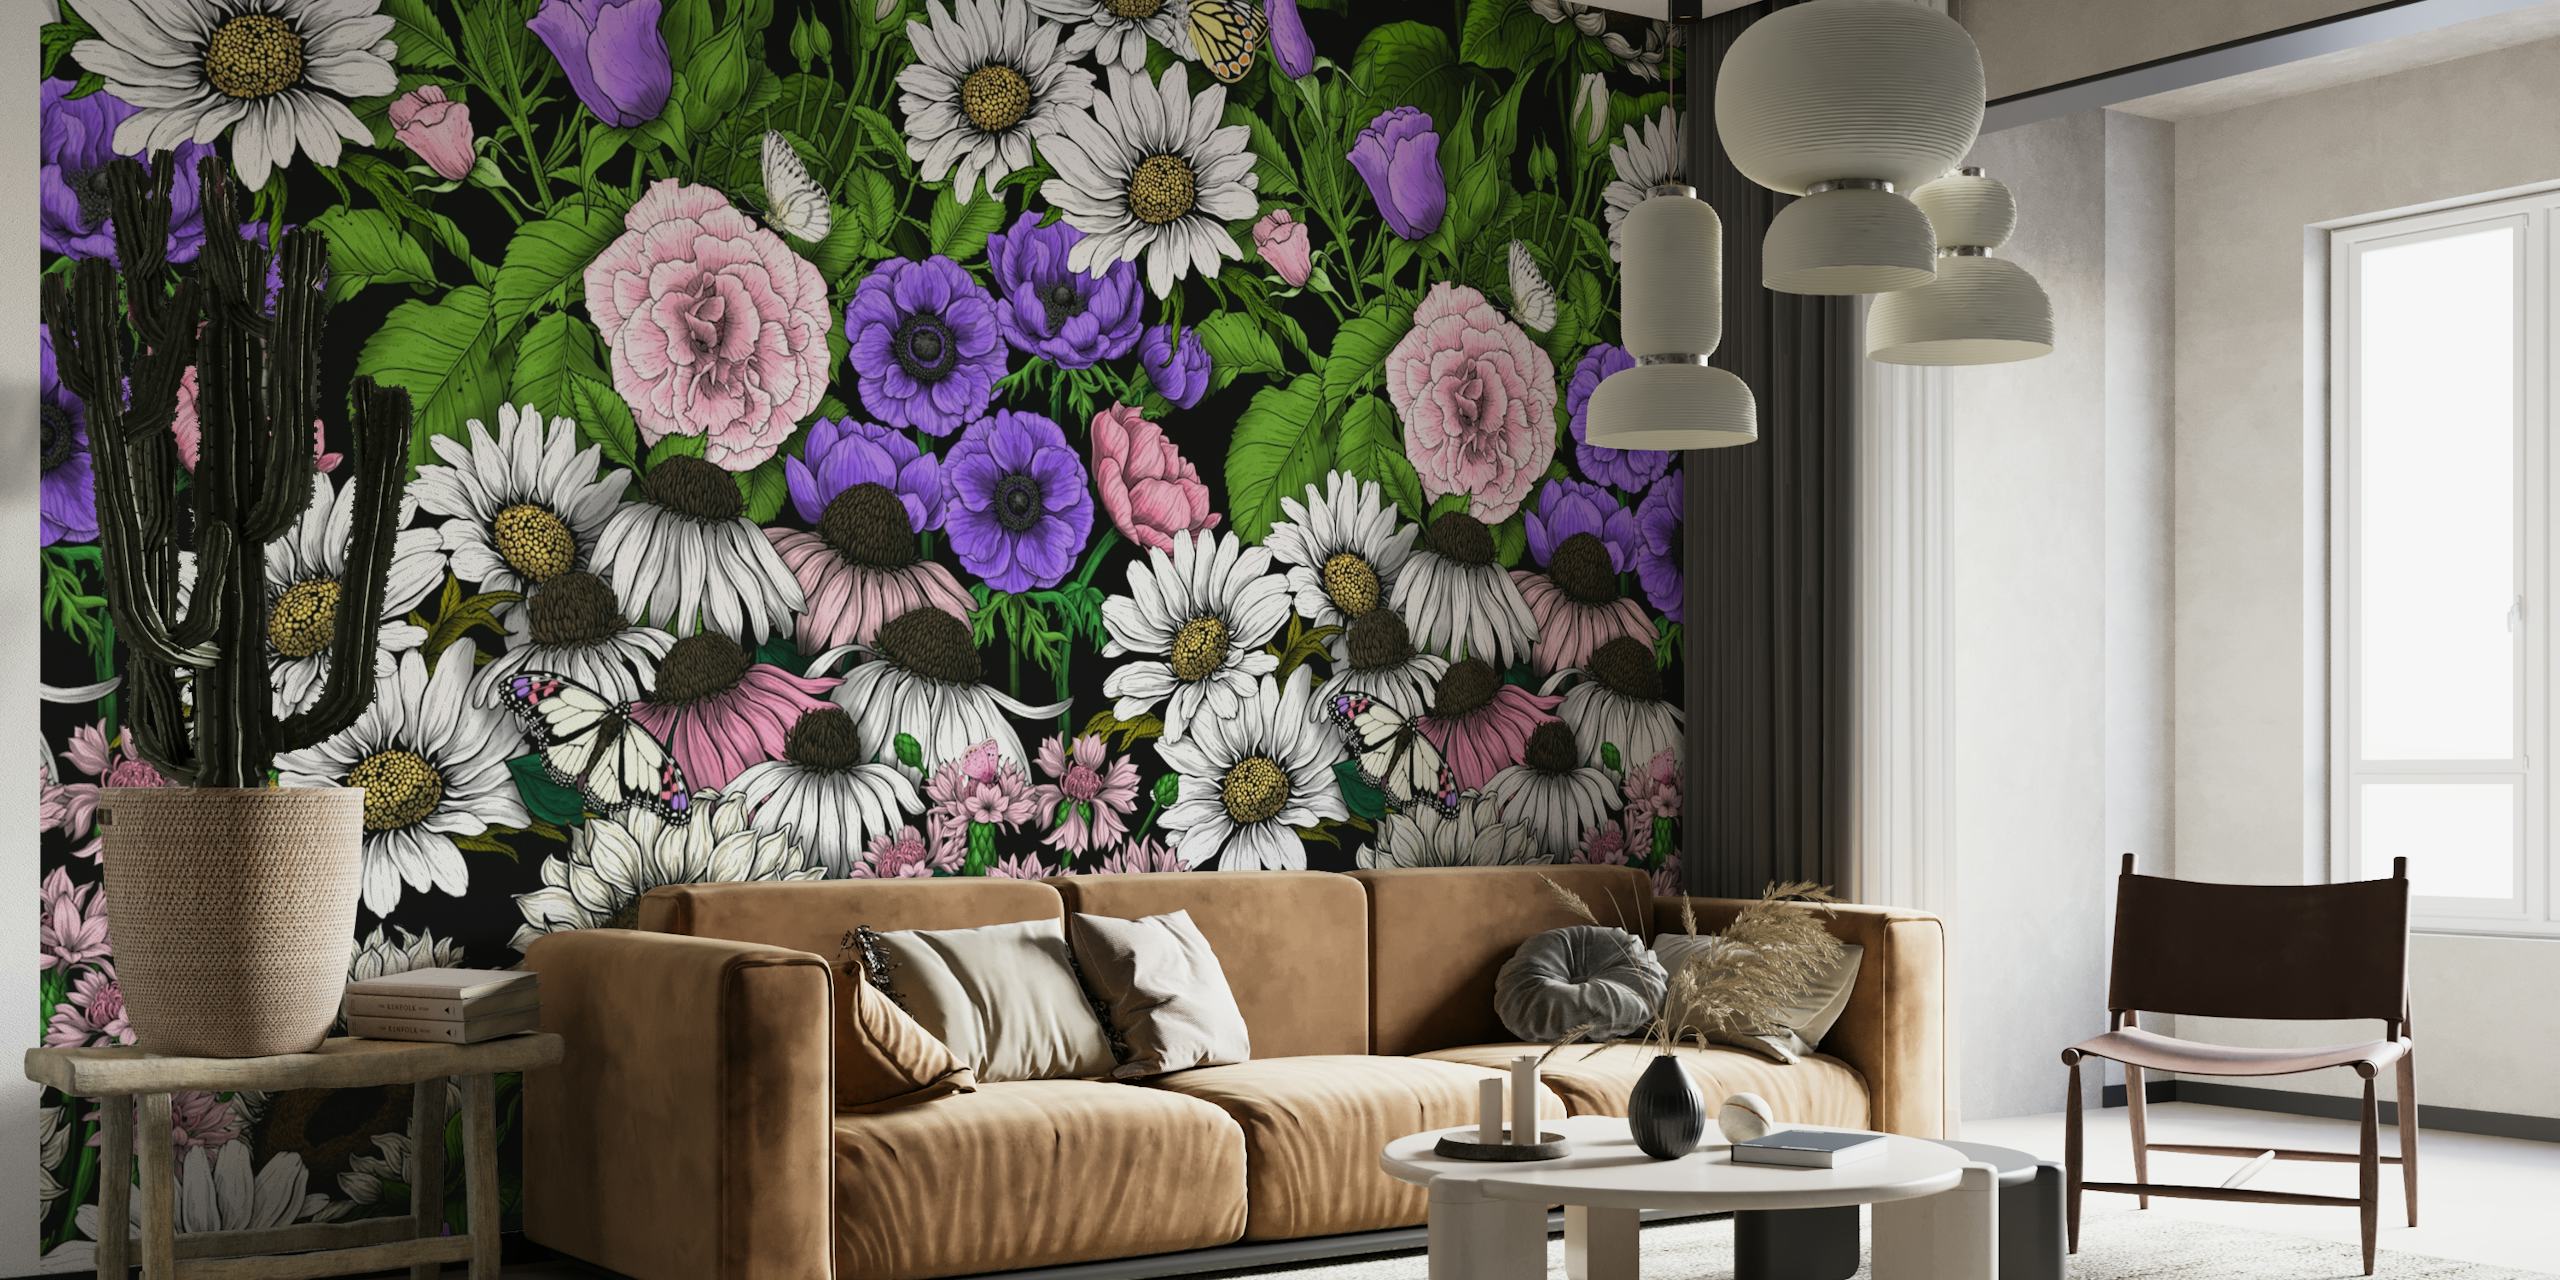 Close-up of 'Garden Bedding - Collection 2' wall mural showing colorful flowers and green leaves pattern